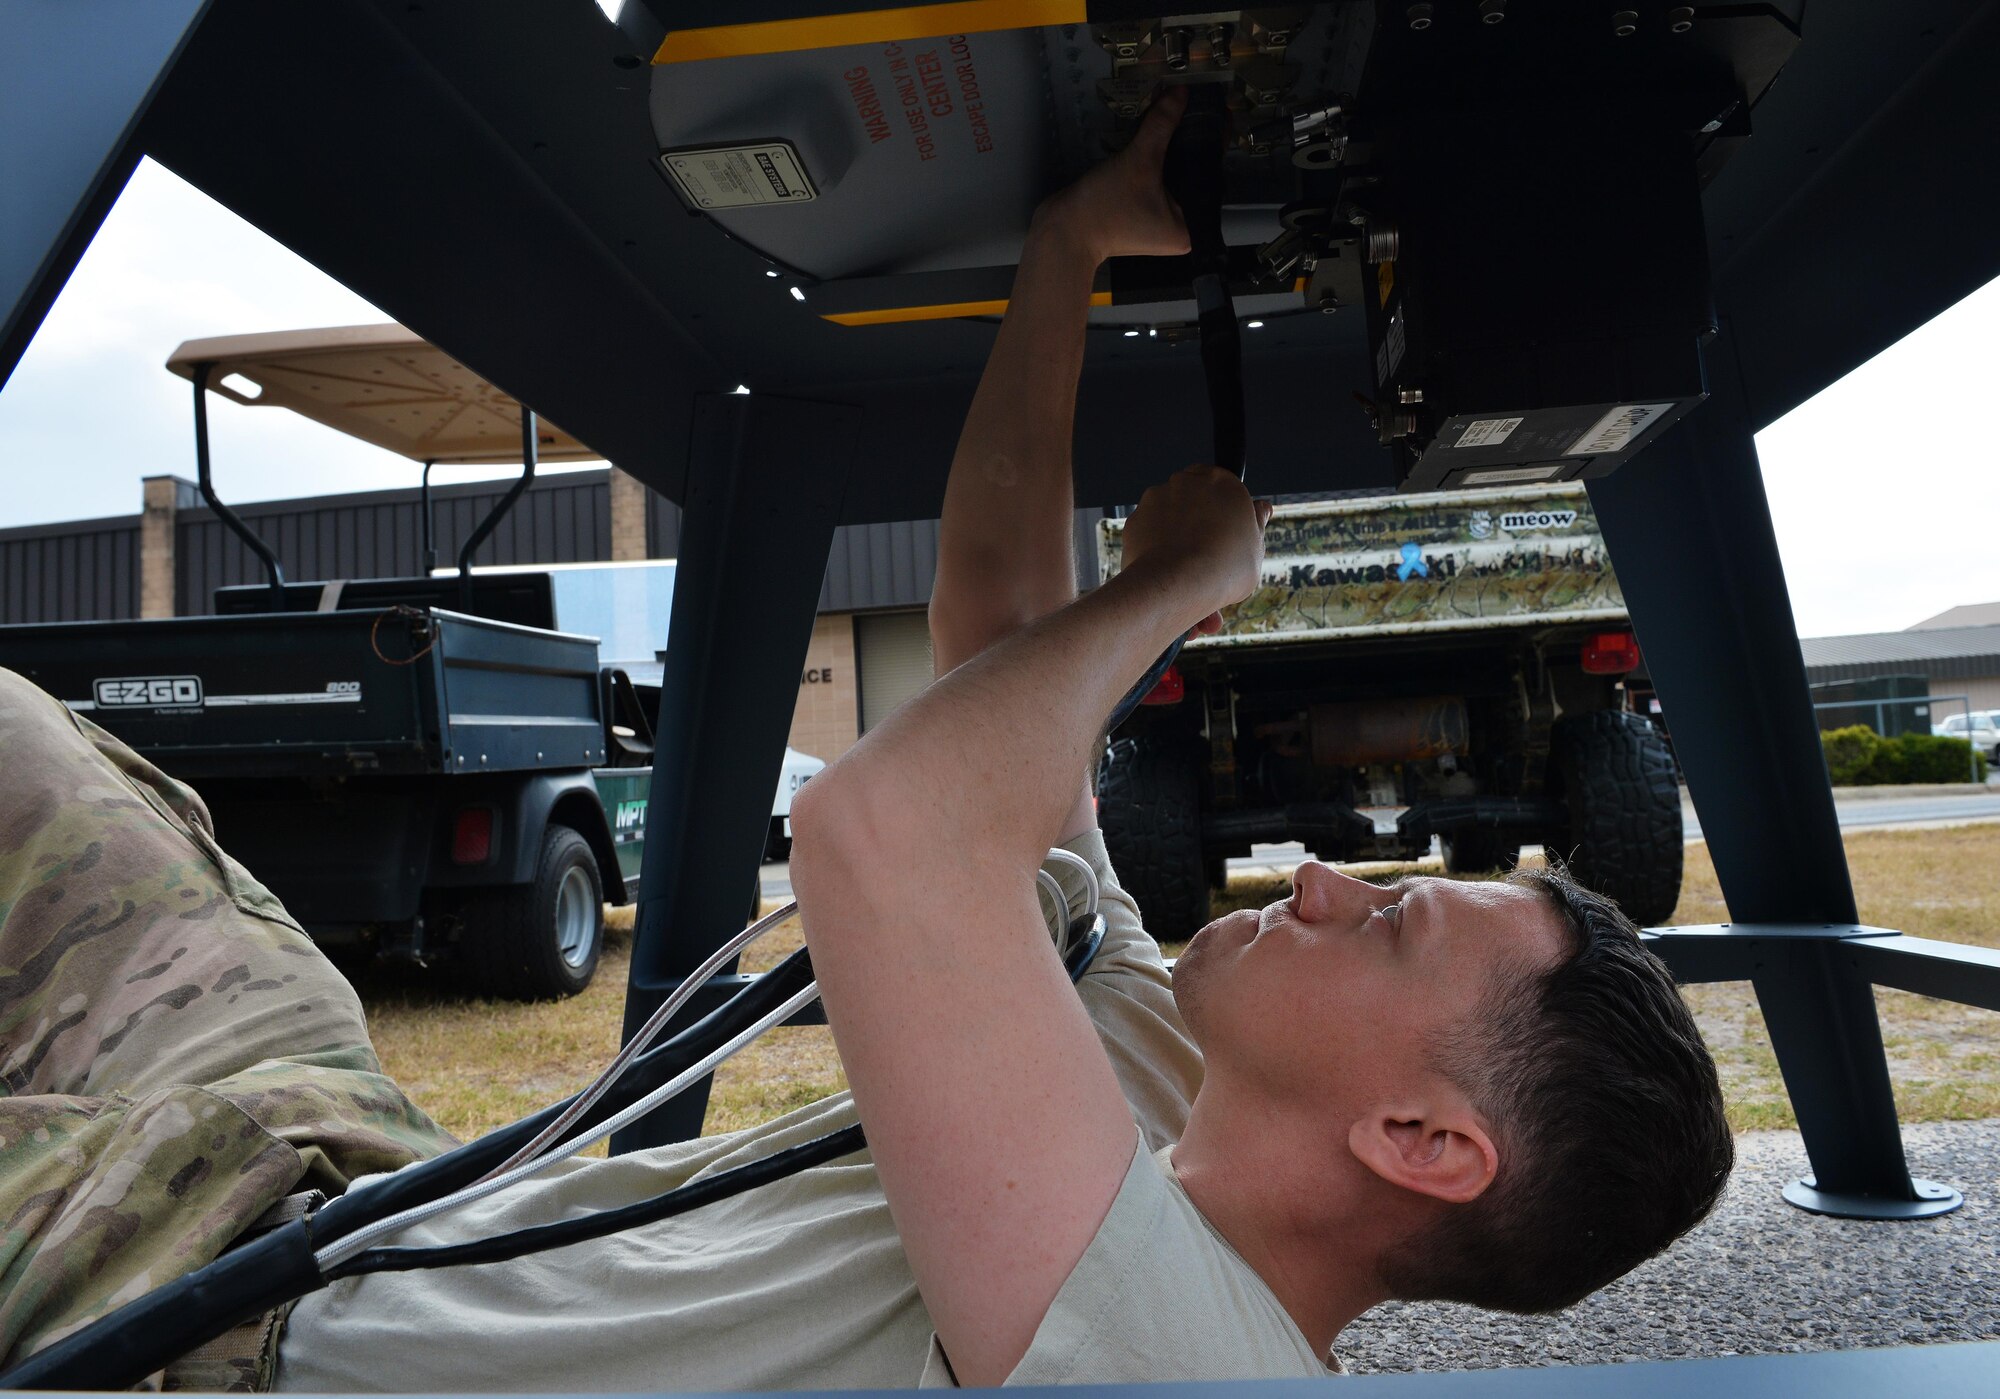 Staff Sgt. Ryan Hart, a radio frequency transmission system supervisor with the 1st Special Operations Communications Squadron, hooks a radio frequency system cable to a Ku Spread Spectrum antenna at Hurlburt Field, Fla., Nov. 29, 2016. This cable sends signals and controls data to the KuSS antenna from the internal reference unit. The internal reference unit distributes power to an assembly of modems and routers that control the antenna and log collected data. (U.S. Air Force photo by Senior Airman Andrea Posey)